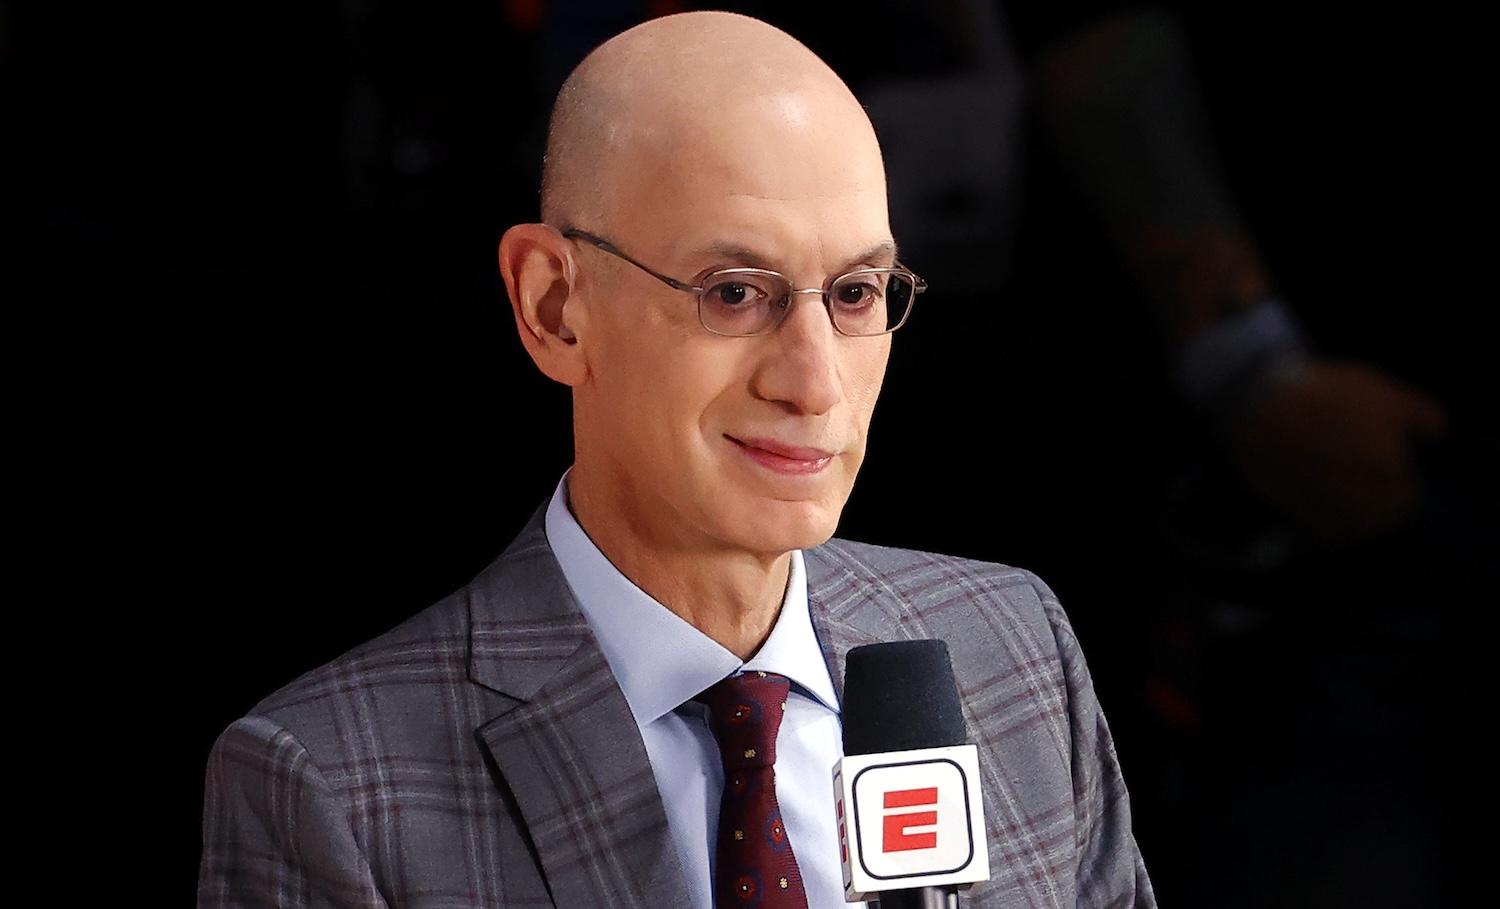 LAKE BUENA VISTA, FLORIDA - OCTOBER 04: NBA Commissioner Adam Silver is interviewed before Game Three of the 2020 NBA Finals between the Miami Heat and the Los Angeles Lakers at AdventHealth Arena at ESPN Wide World Of Sports Complex on October 04, 2020 in Lake Buena Vista, Florida. NOTE TO USER: User expressly acknowledges and agrees that, by downloading and or using this photograph, User is consenting to the terms and conditions of the Getty Images License Agreement. (Photo by Kevin C. Cox/Getty Images)